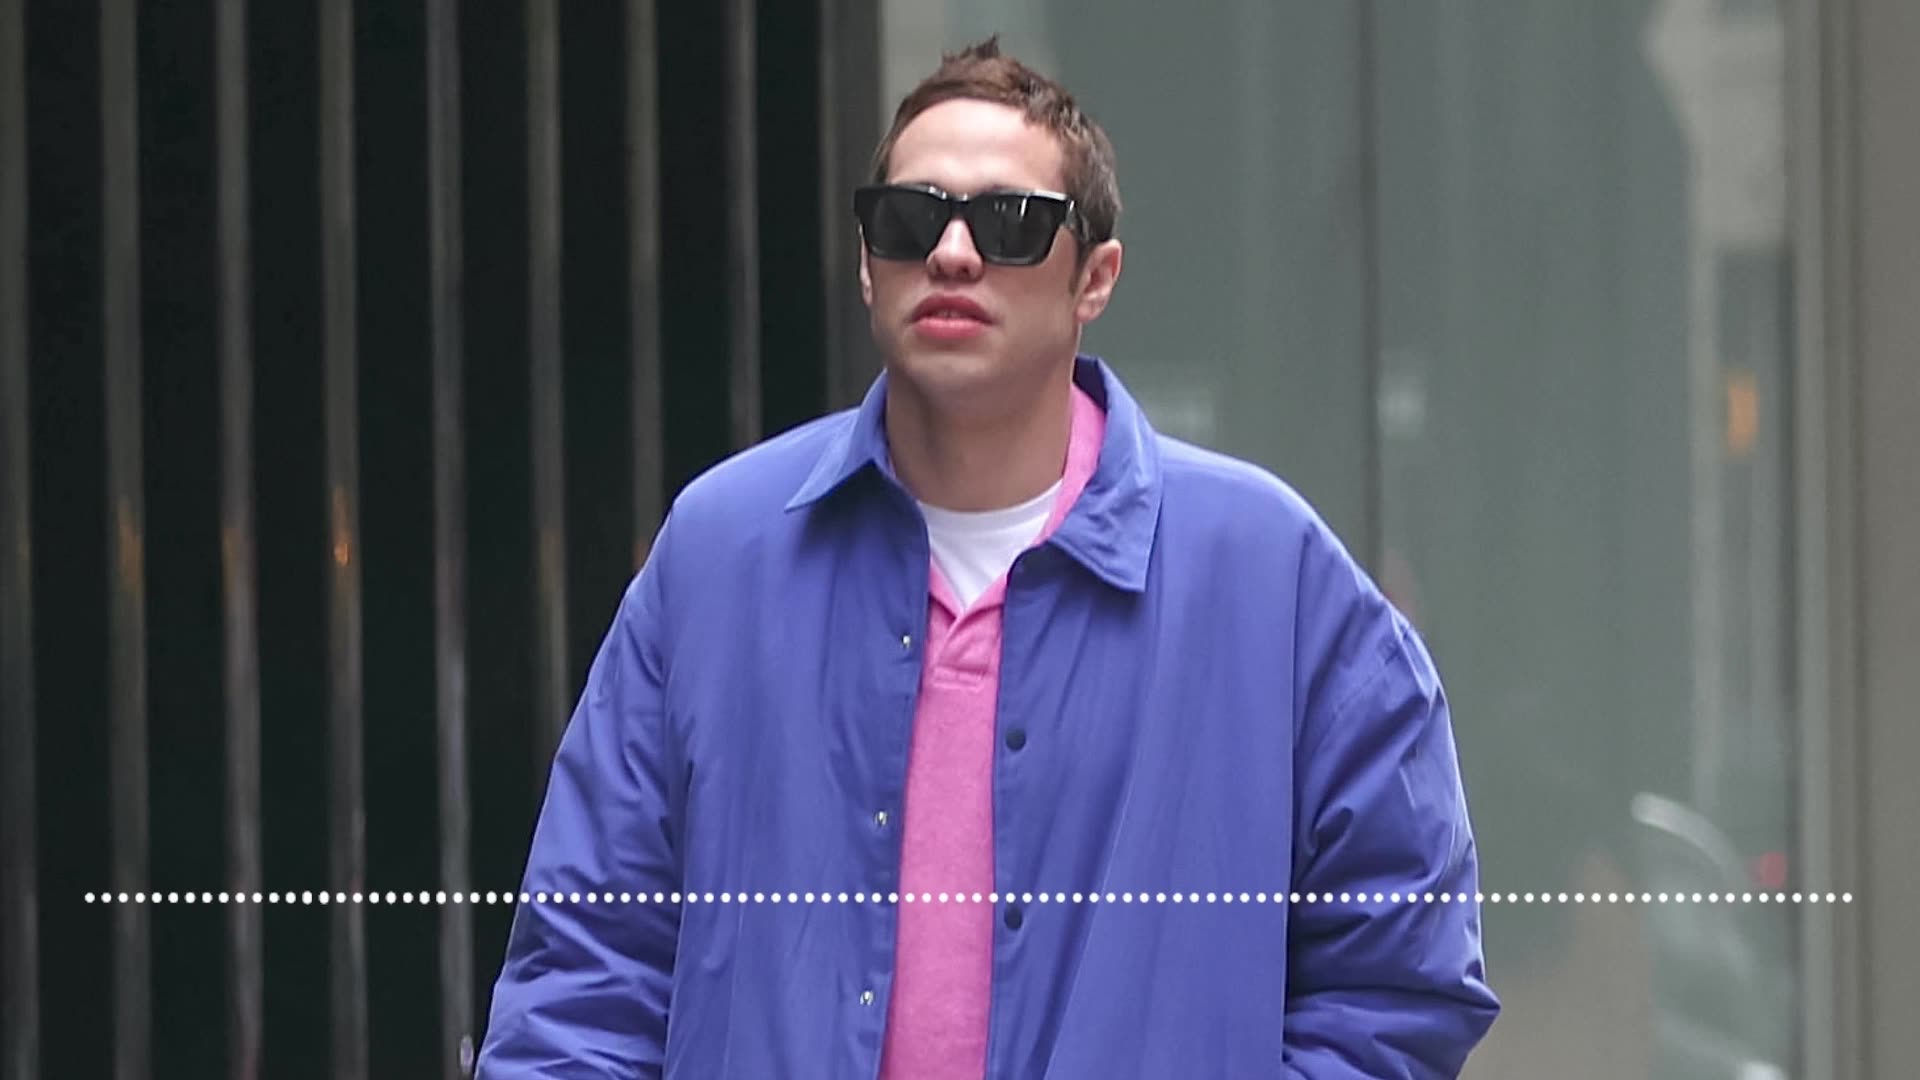 Listen to the explicit voicemail of Pete Davidson blasting PETA over new dog